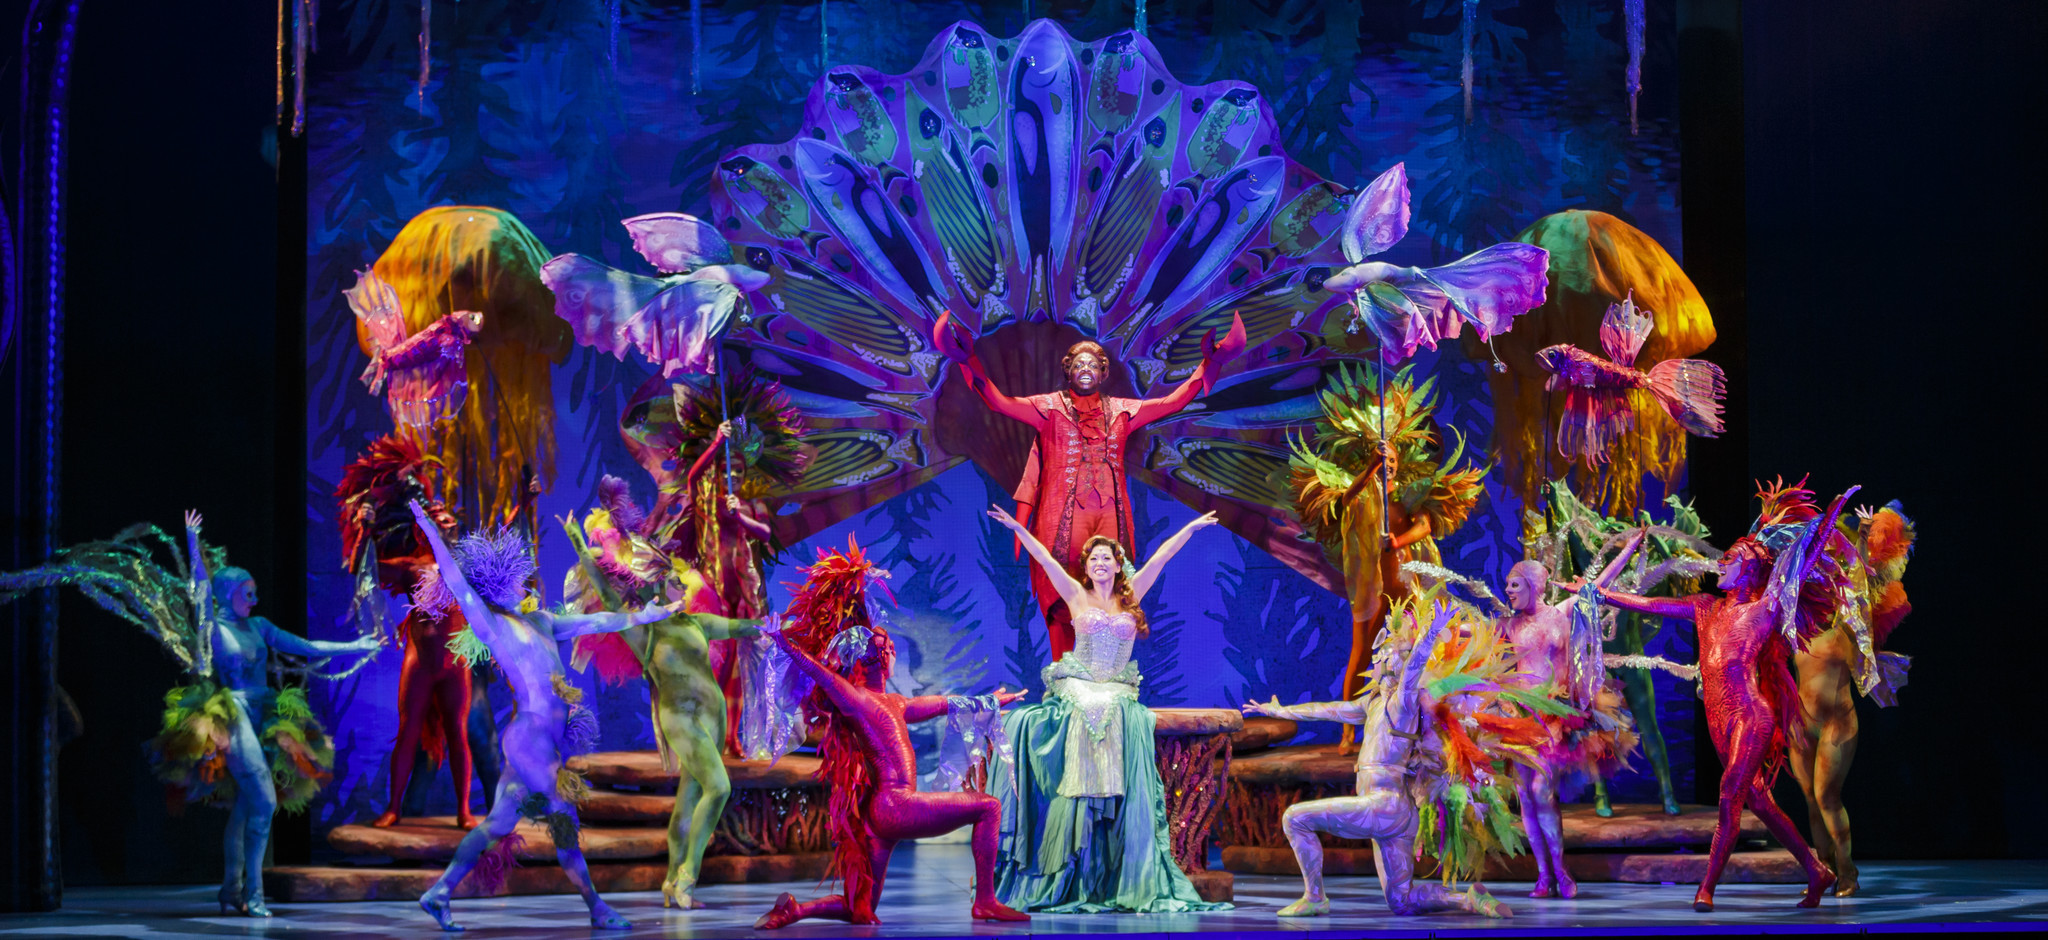 Without magic or charm, ‘Little Mermaid’ is all wet - Orlando Sentinel